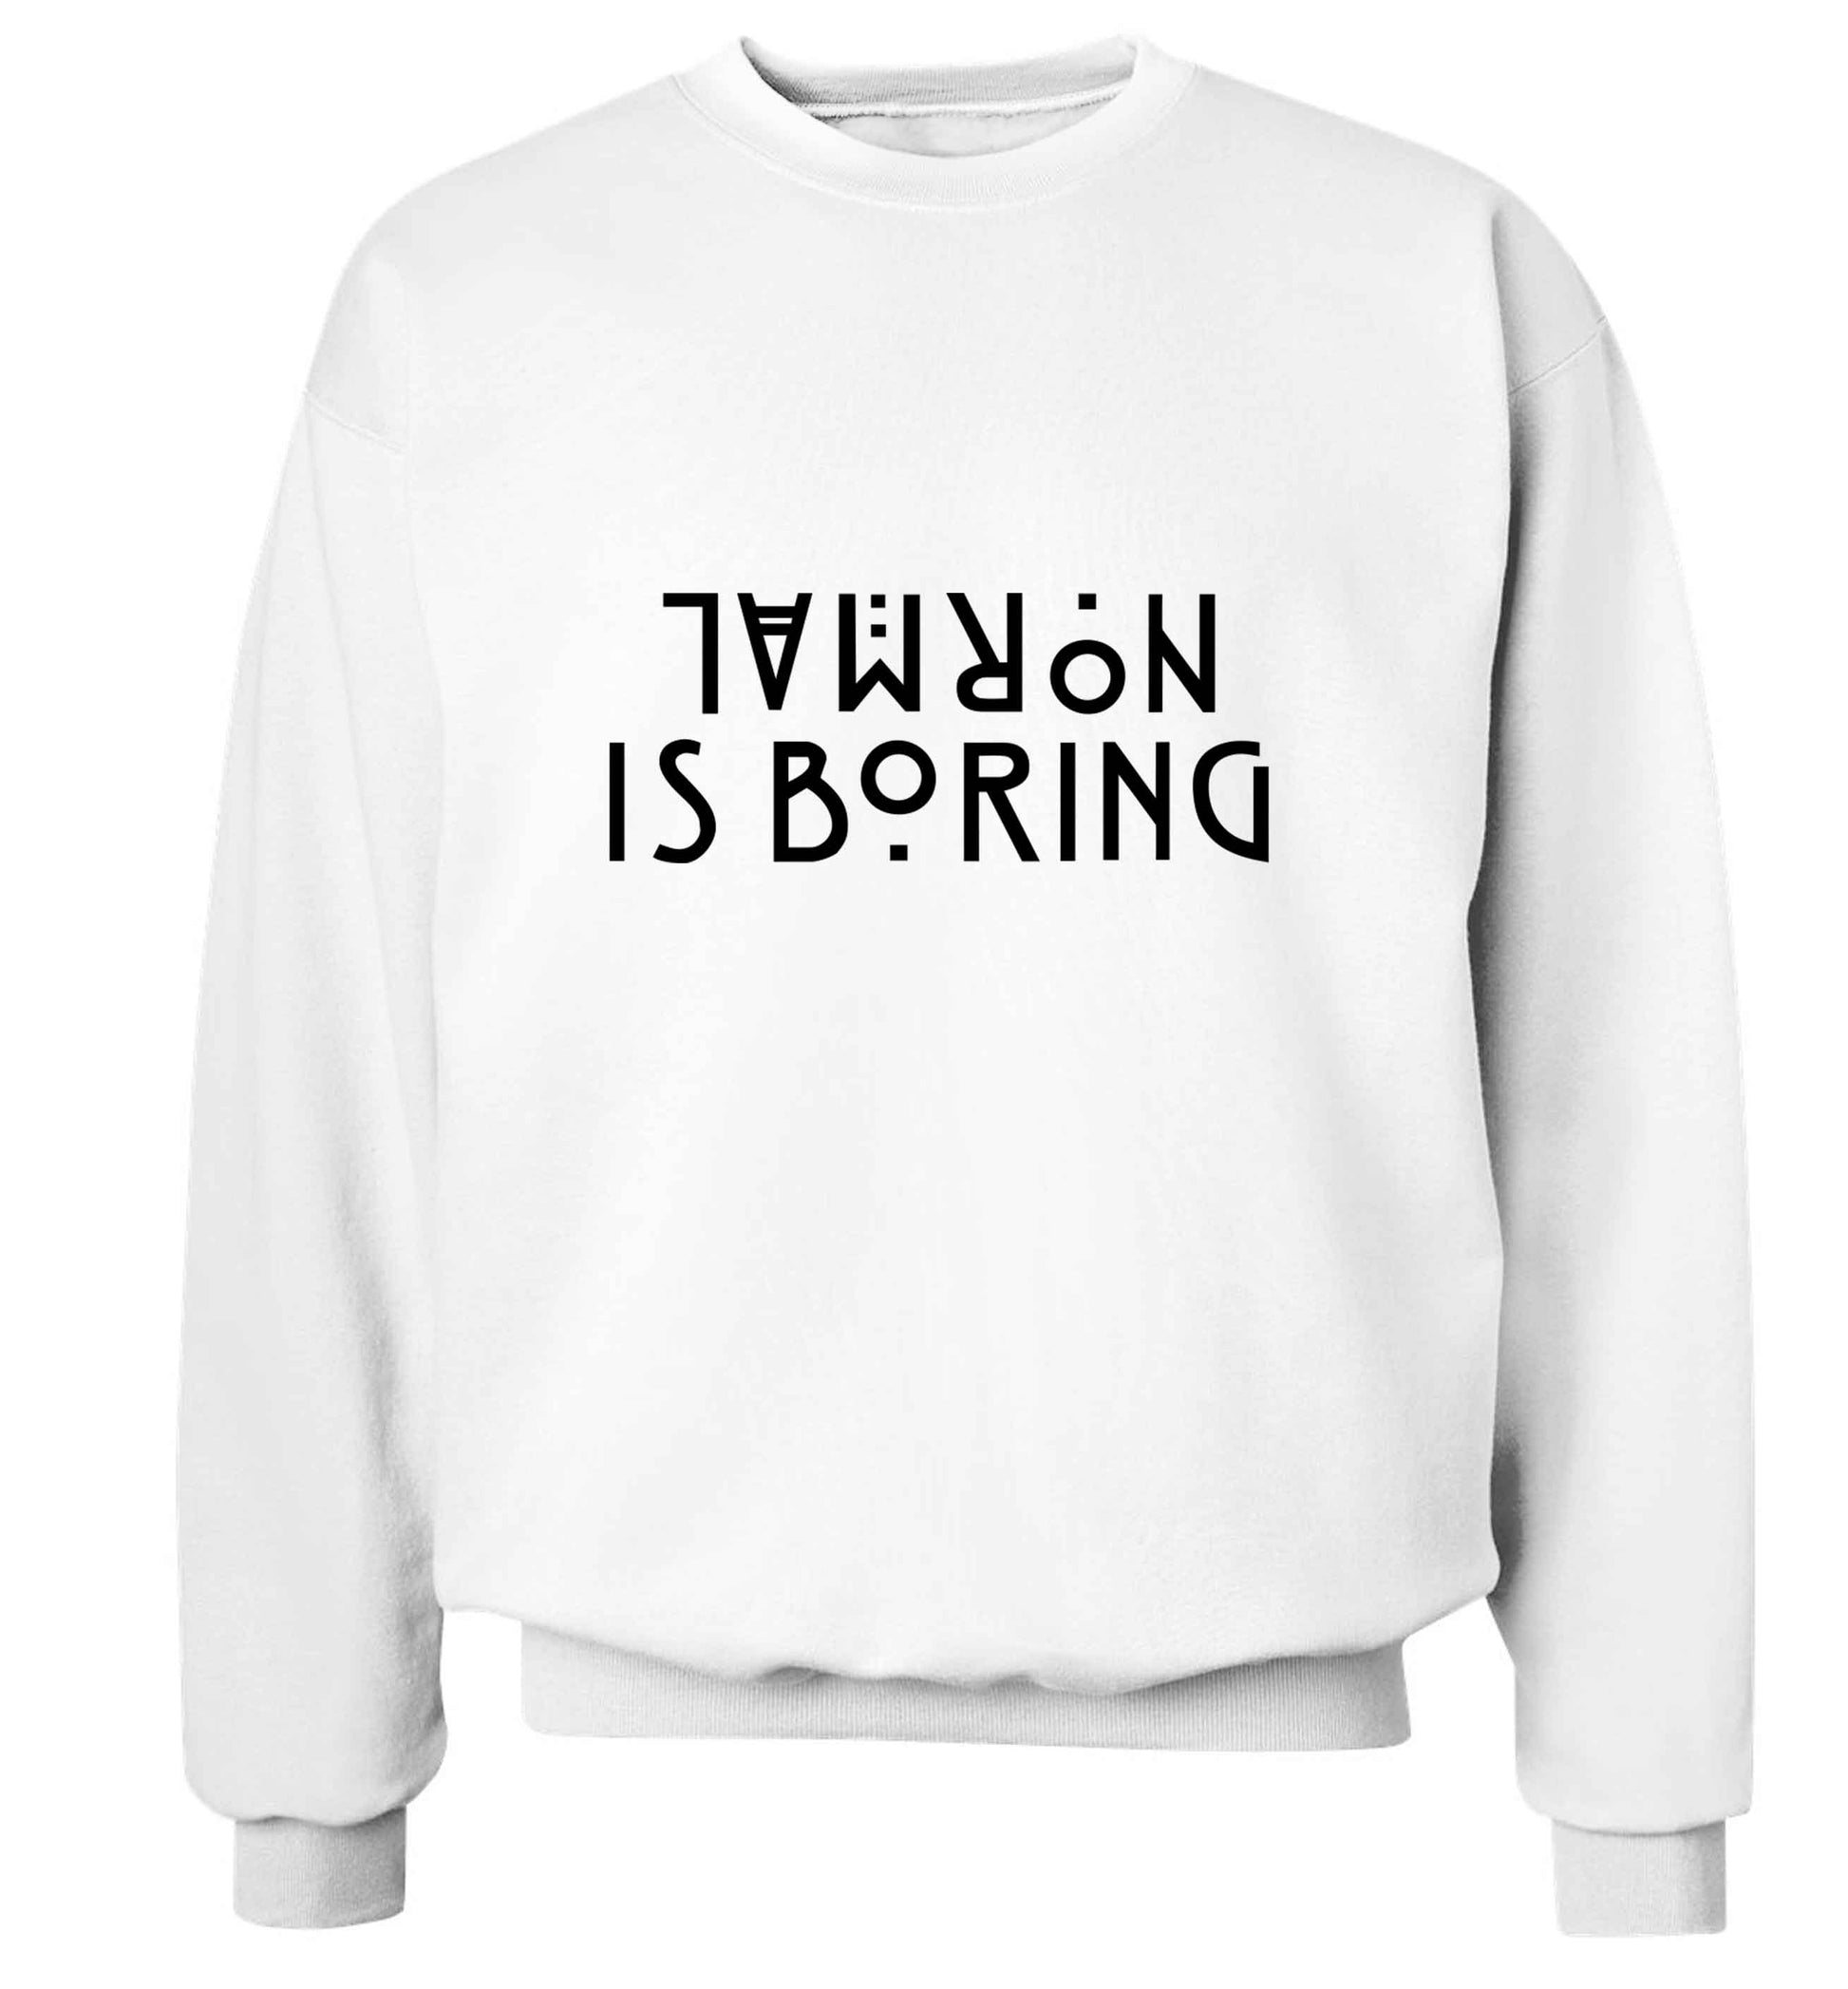 Normal is boring adult's unisex white sweater 2XL